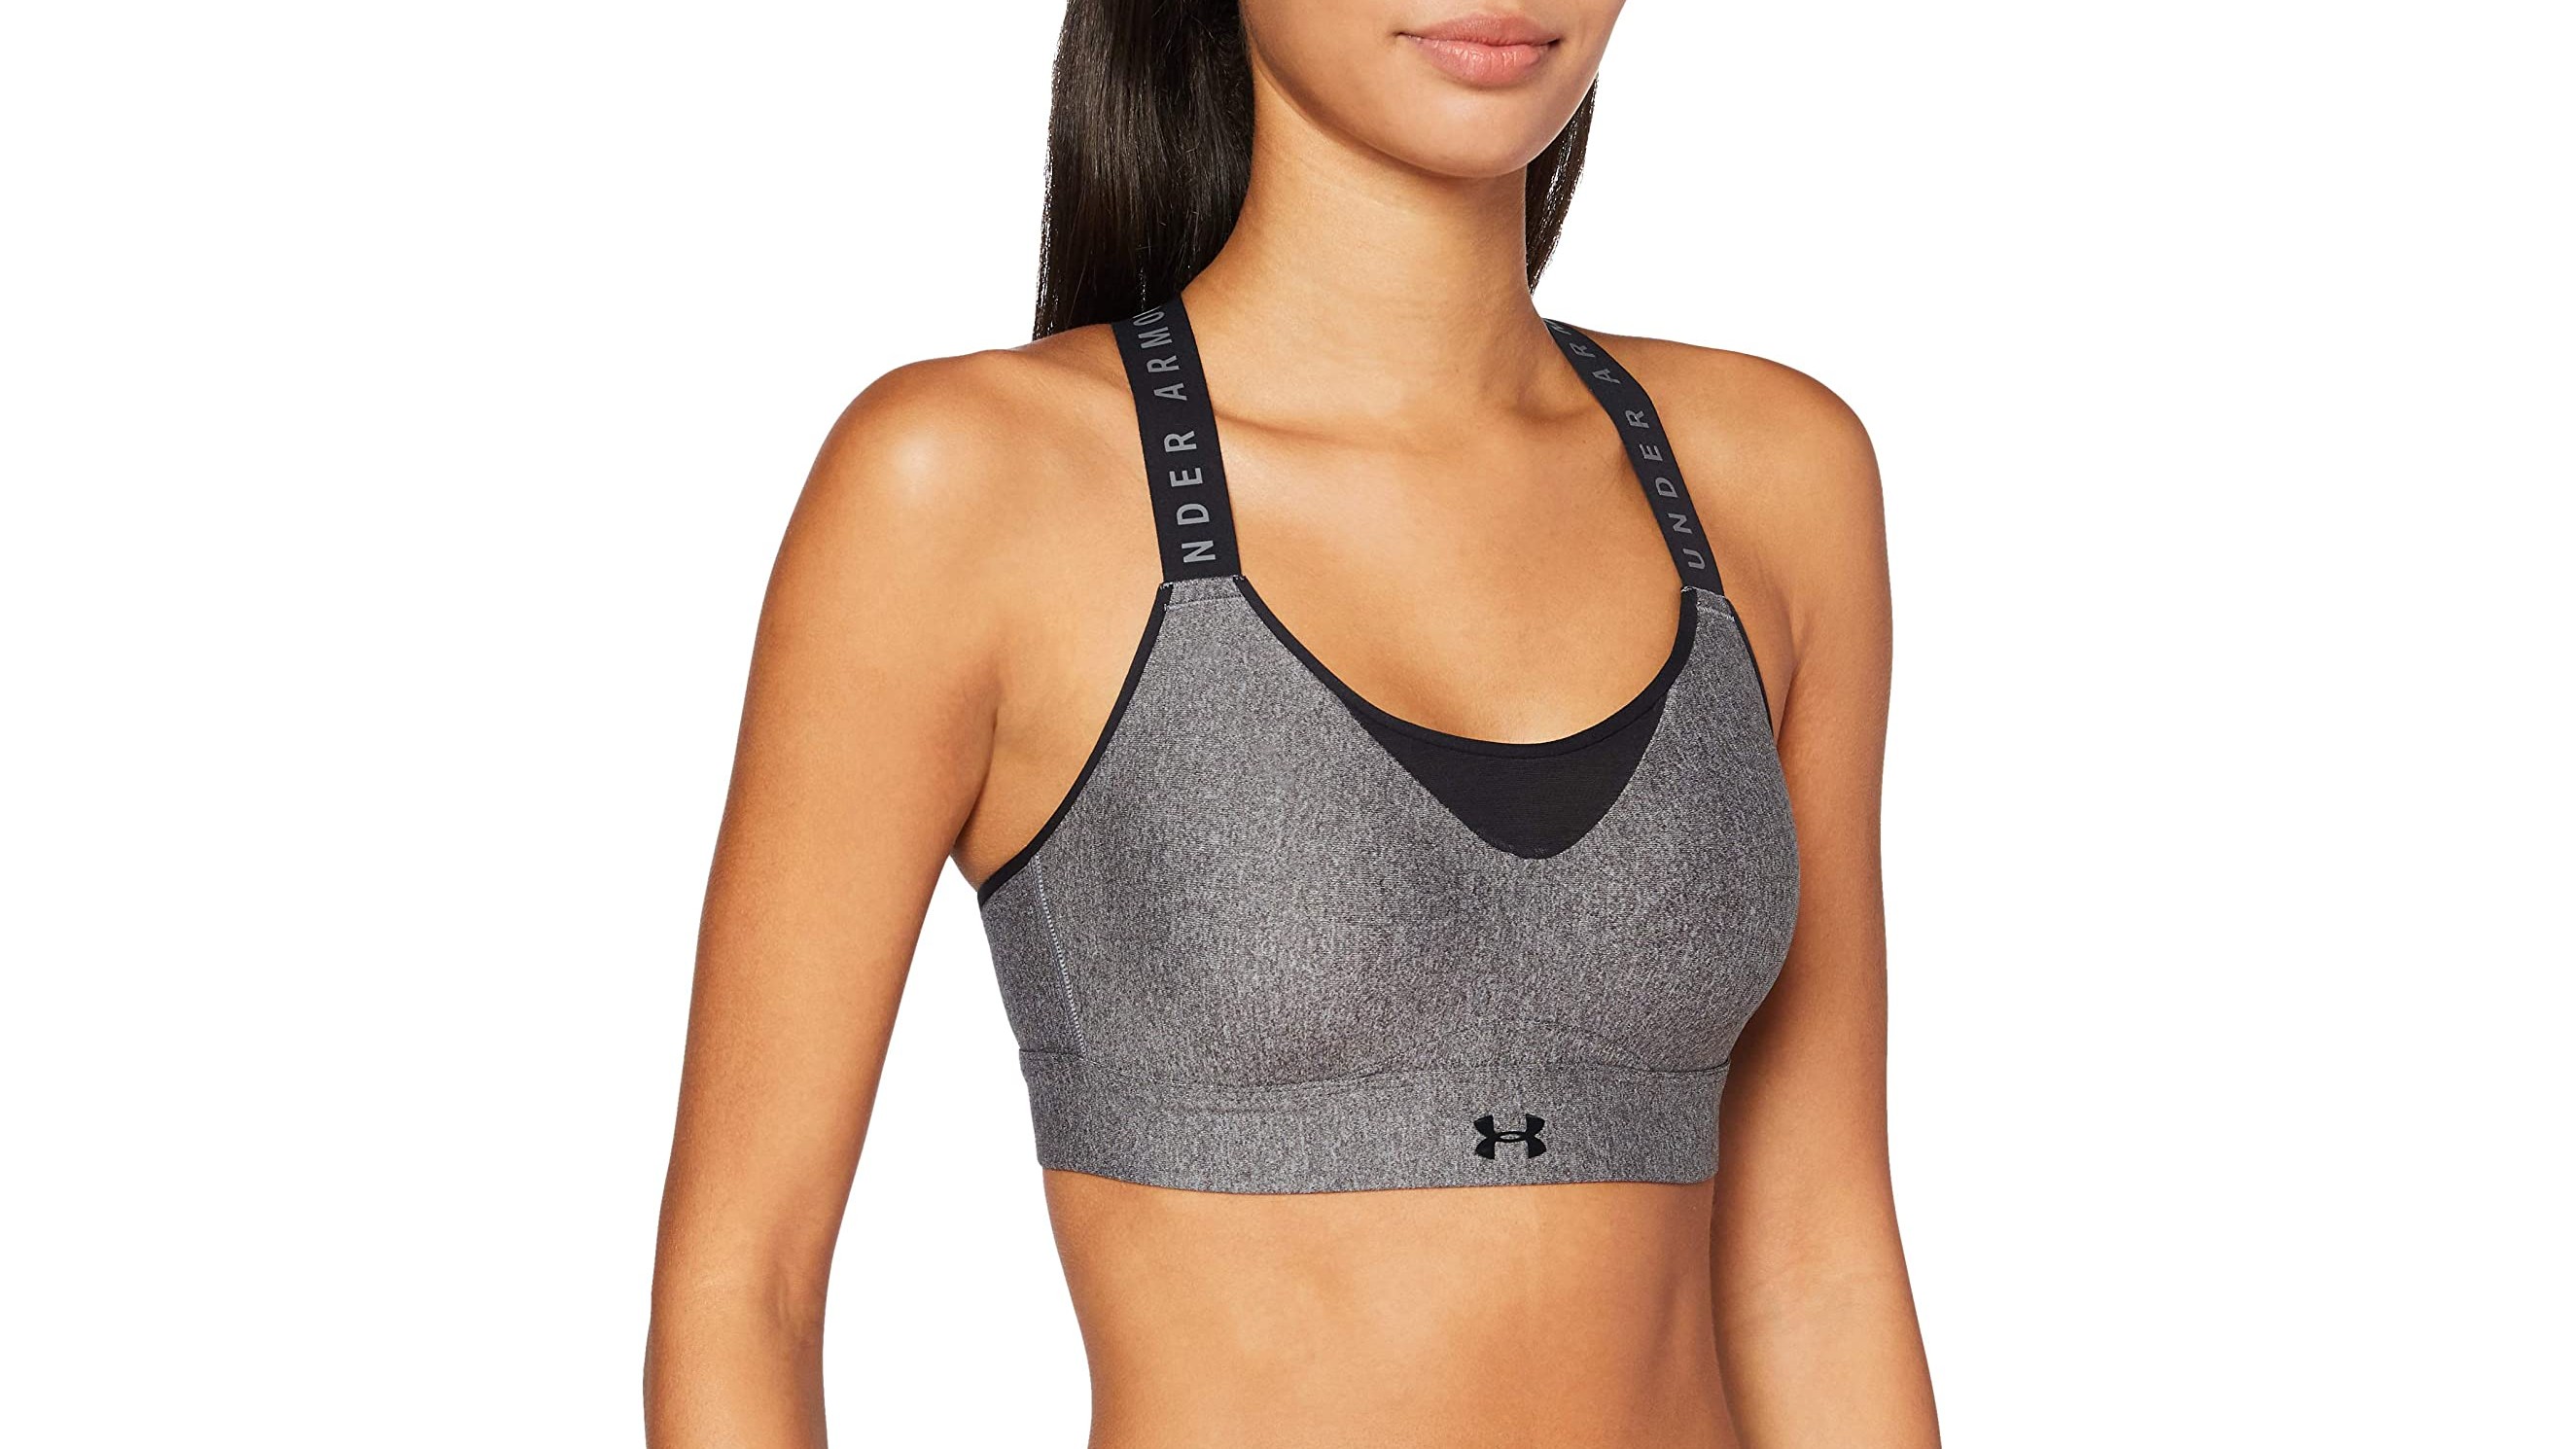 Model wearing an Under Armour Infinity High sports bra